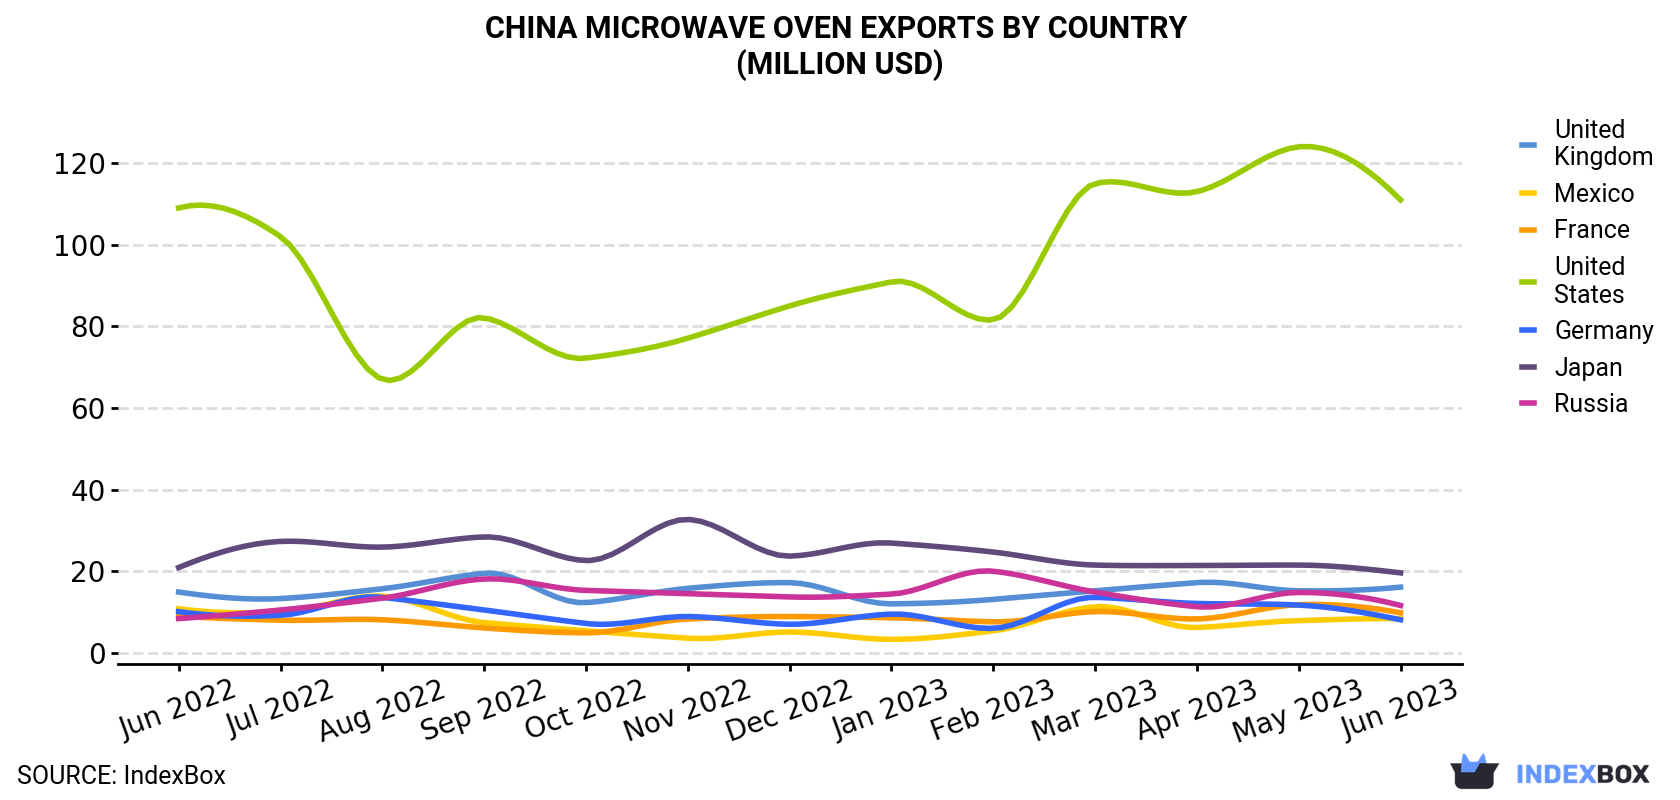 China Microwave Oven Exports By Country (Million USD)